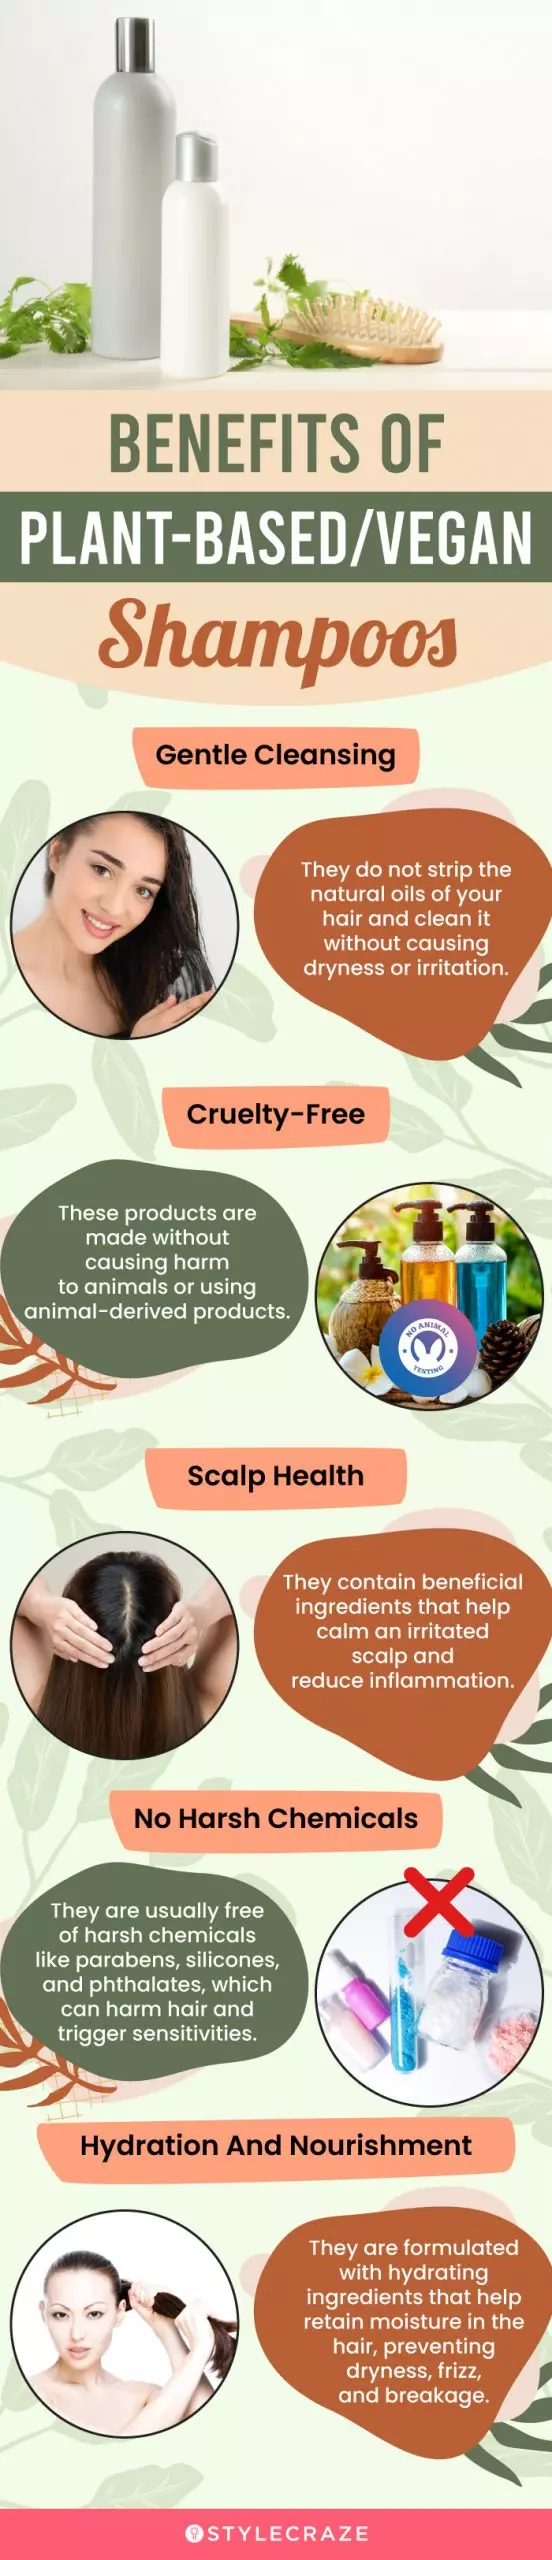 Benefits Of Vegan Products (infographic)